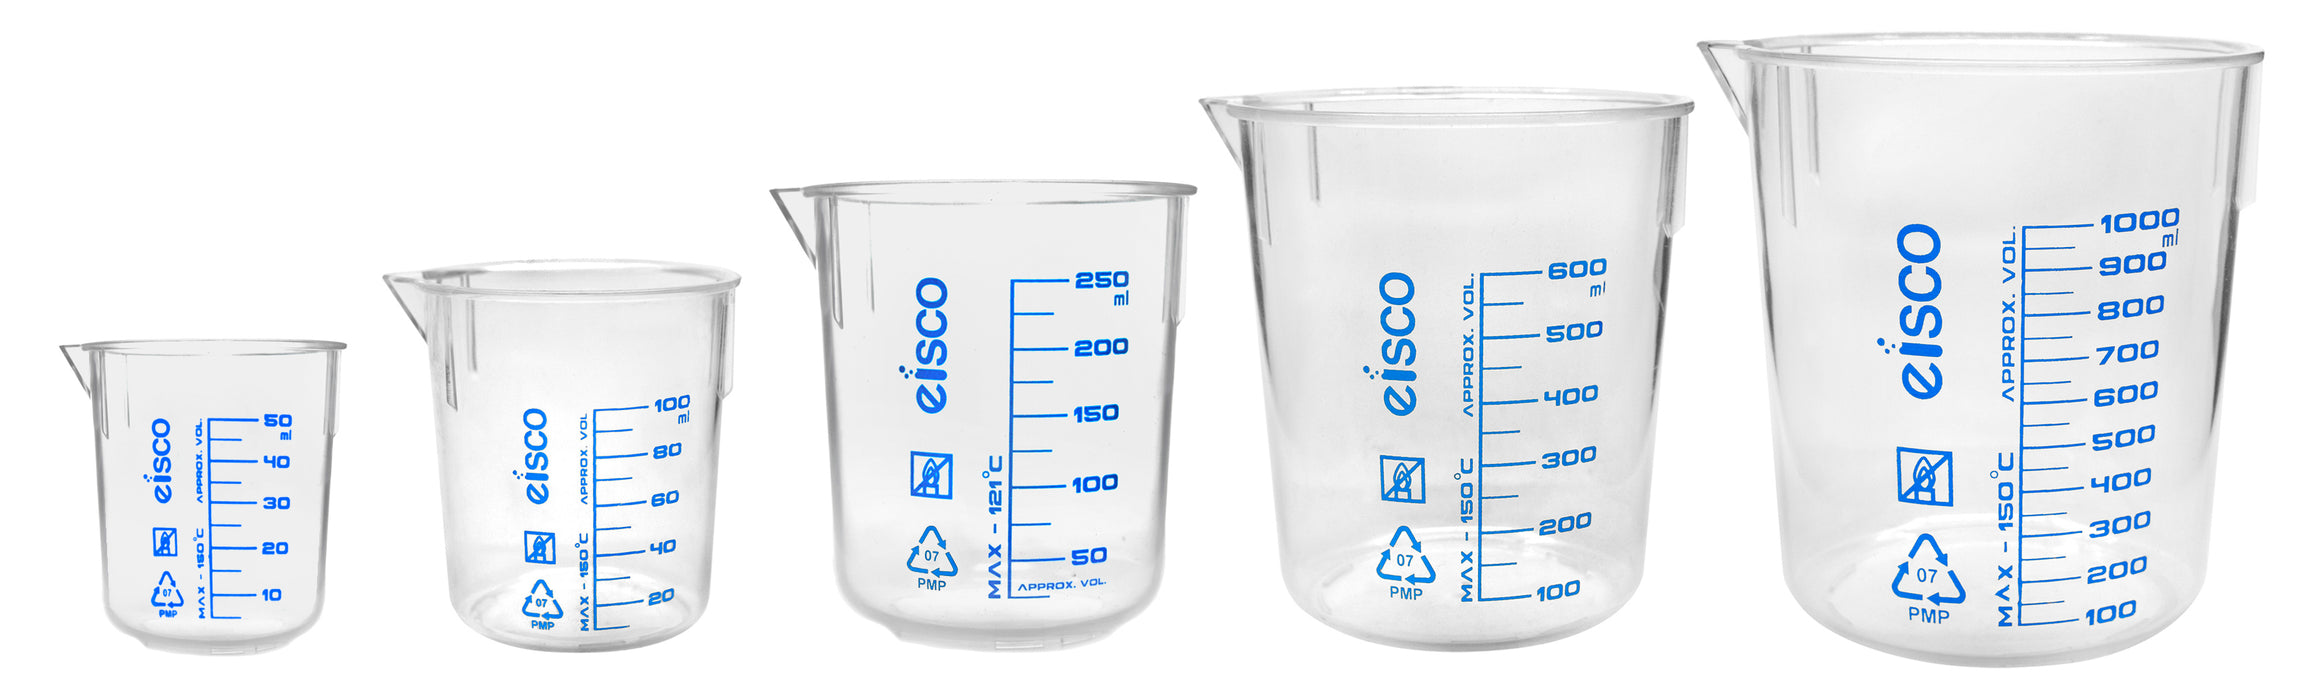 5pc Beaker Set, TPX Plastic - 50, 100, 250, 600 & 1000 - Screen Printed Graduations, Spout for Easy Pouring - Excellent Optical Clarity - Eisco Labs